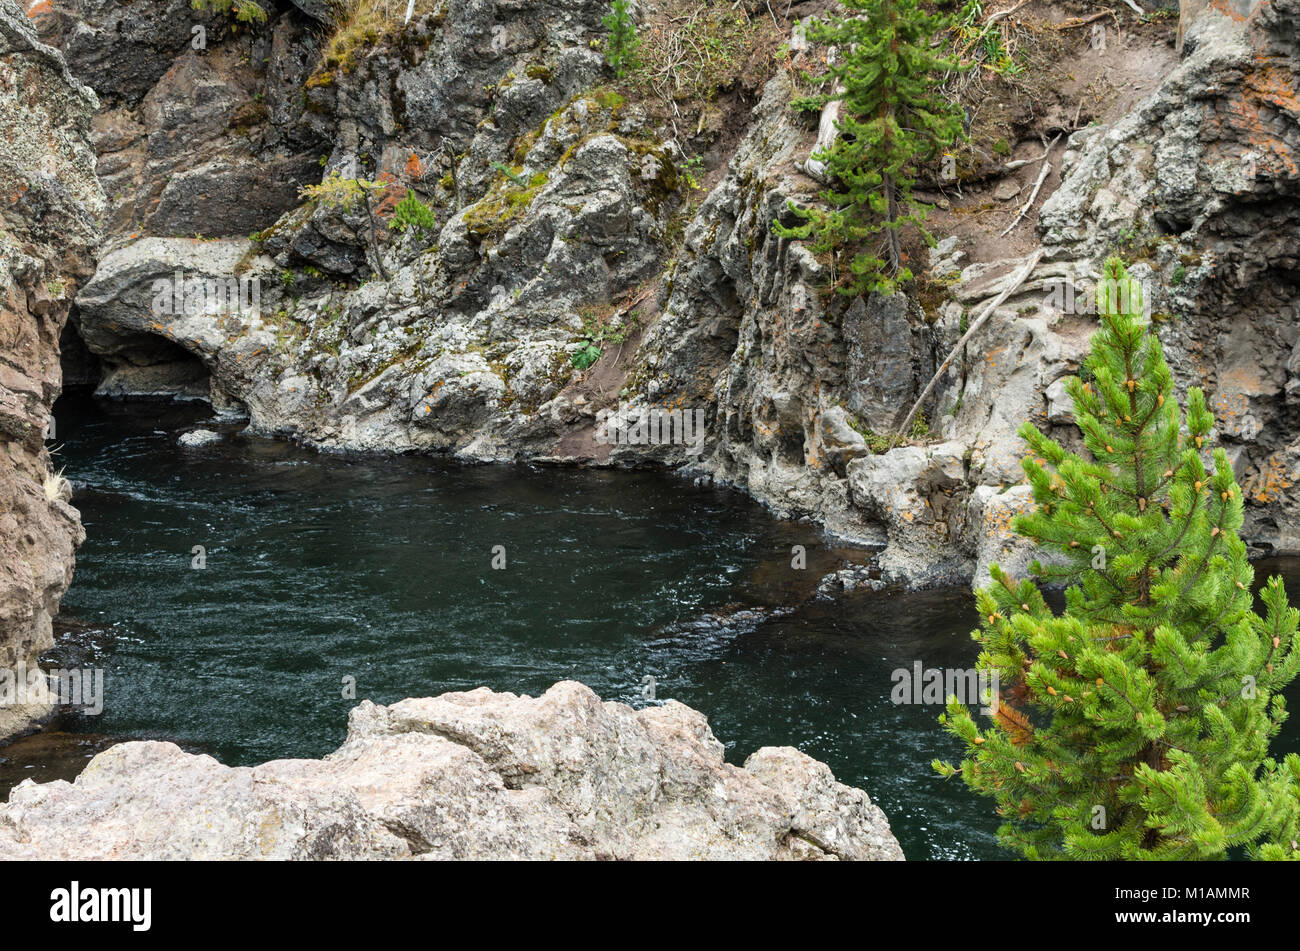 View of teh Firehole River in Yellowstone National Park, Wyoming USA Stock Photo